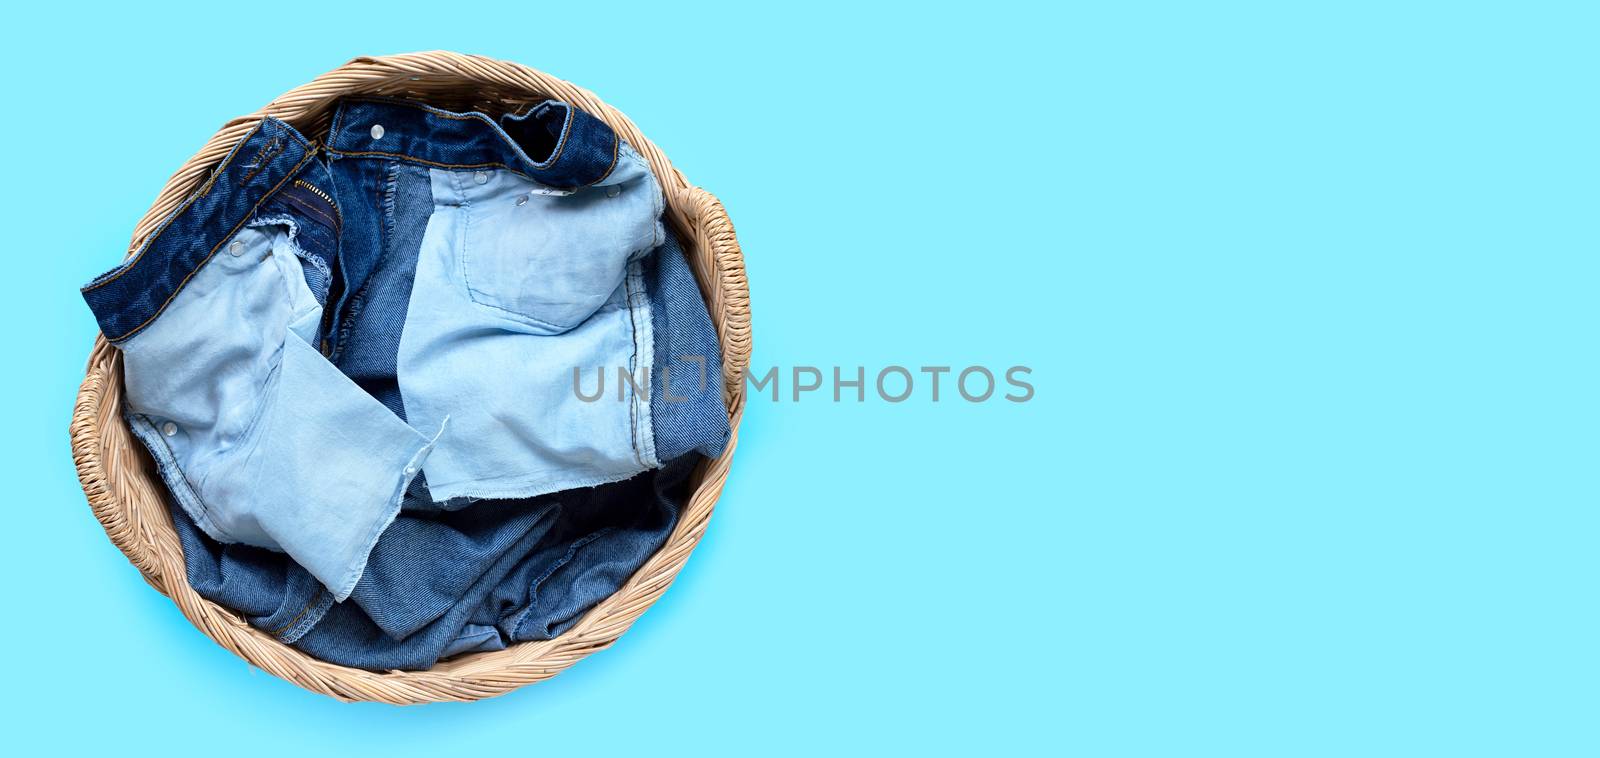 Jeans in laundry basket on blue background.  by Bowonpat